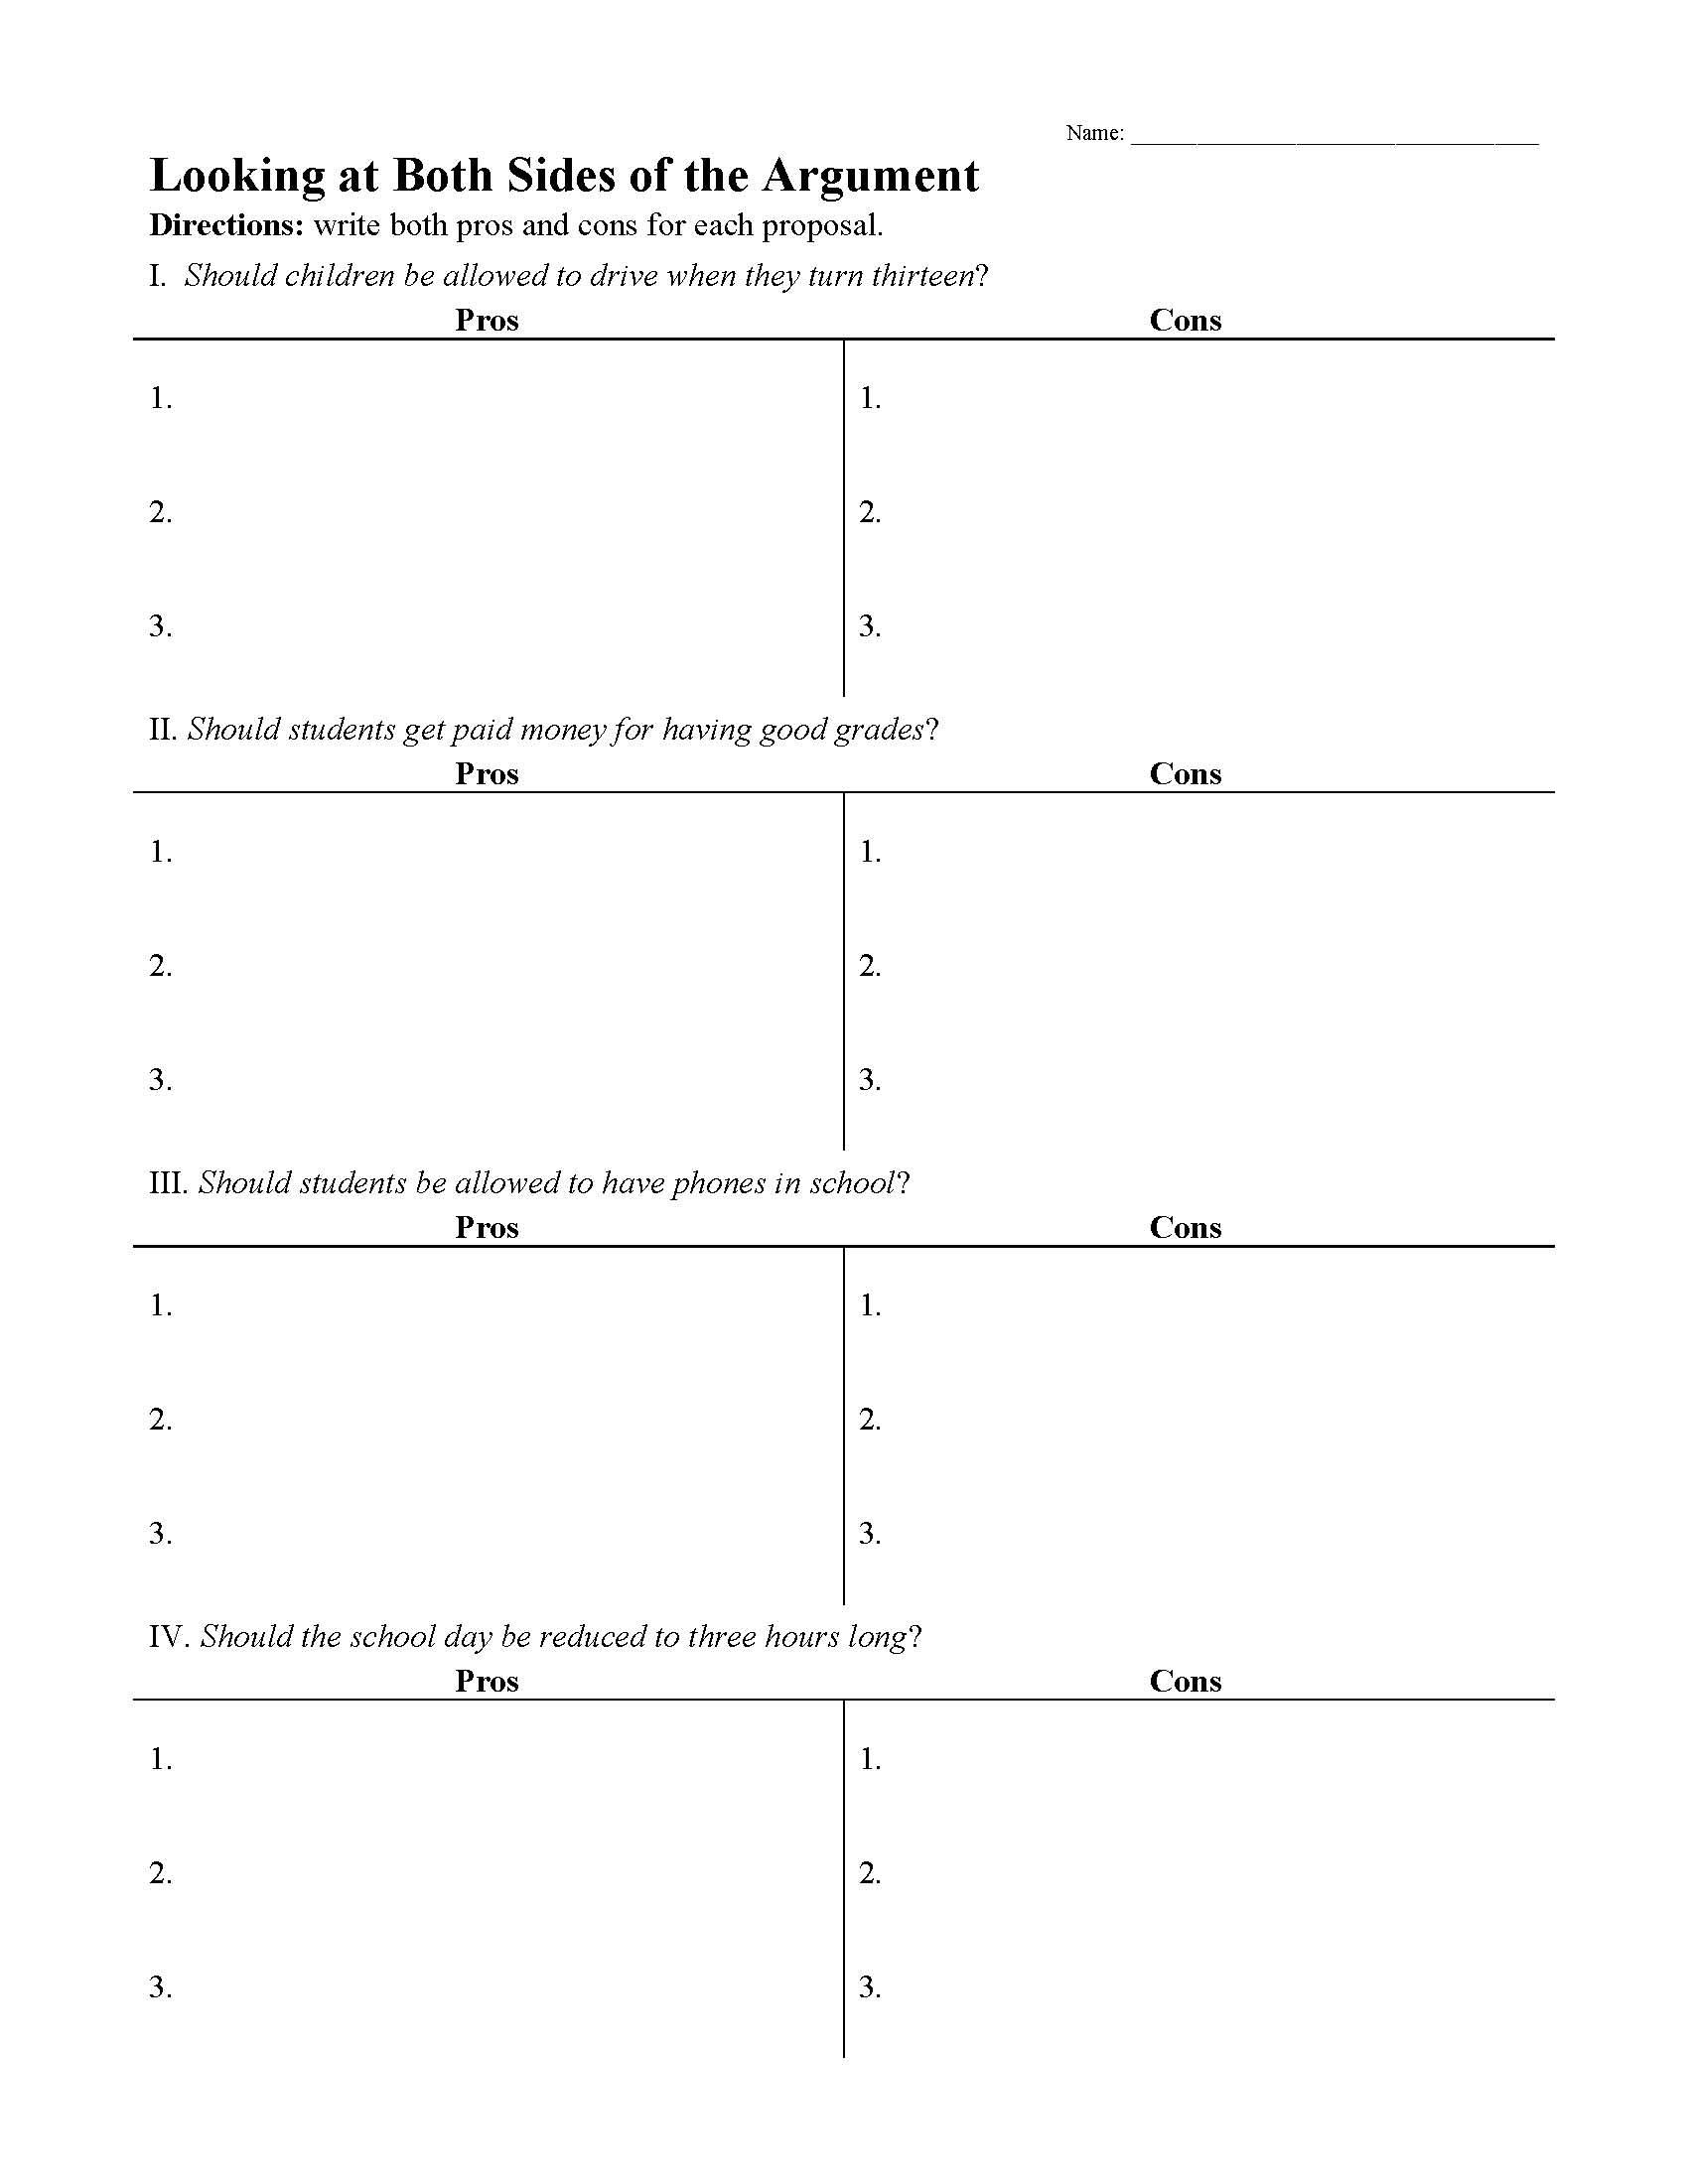 This is a preview image of the Arguing Both Sides Worksheet 2.